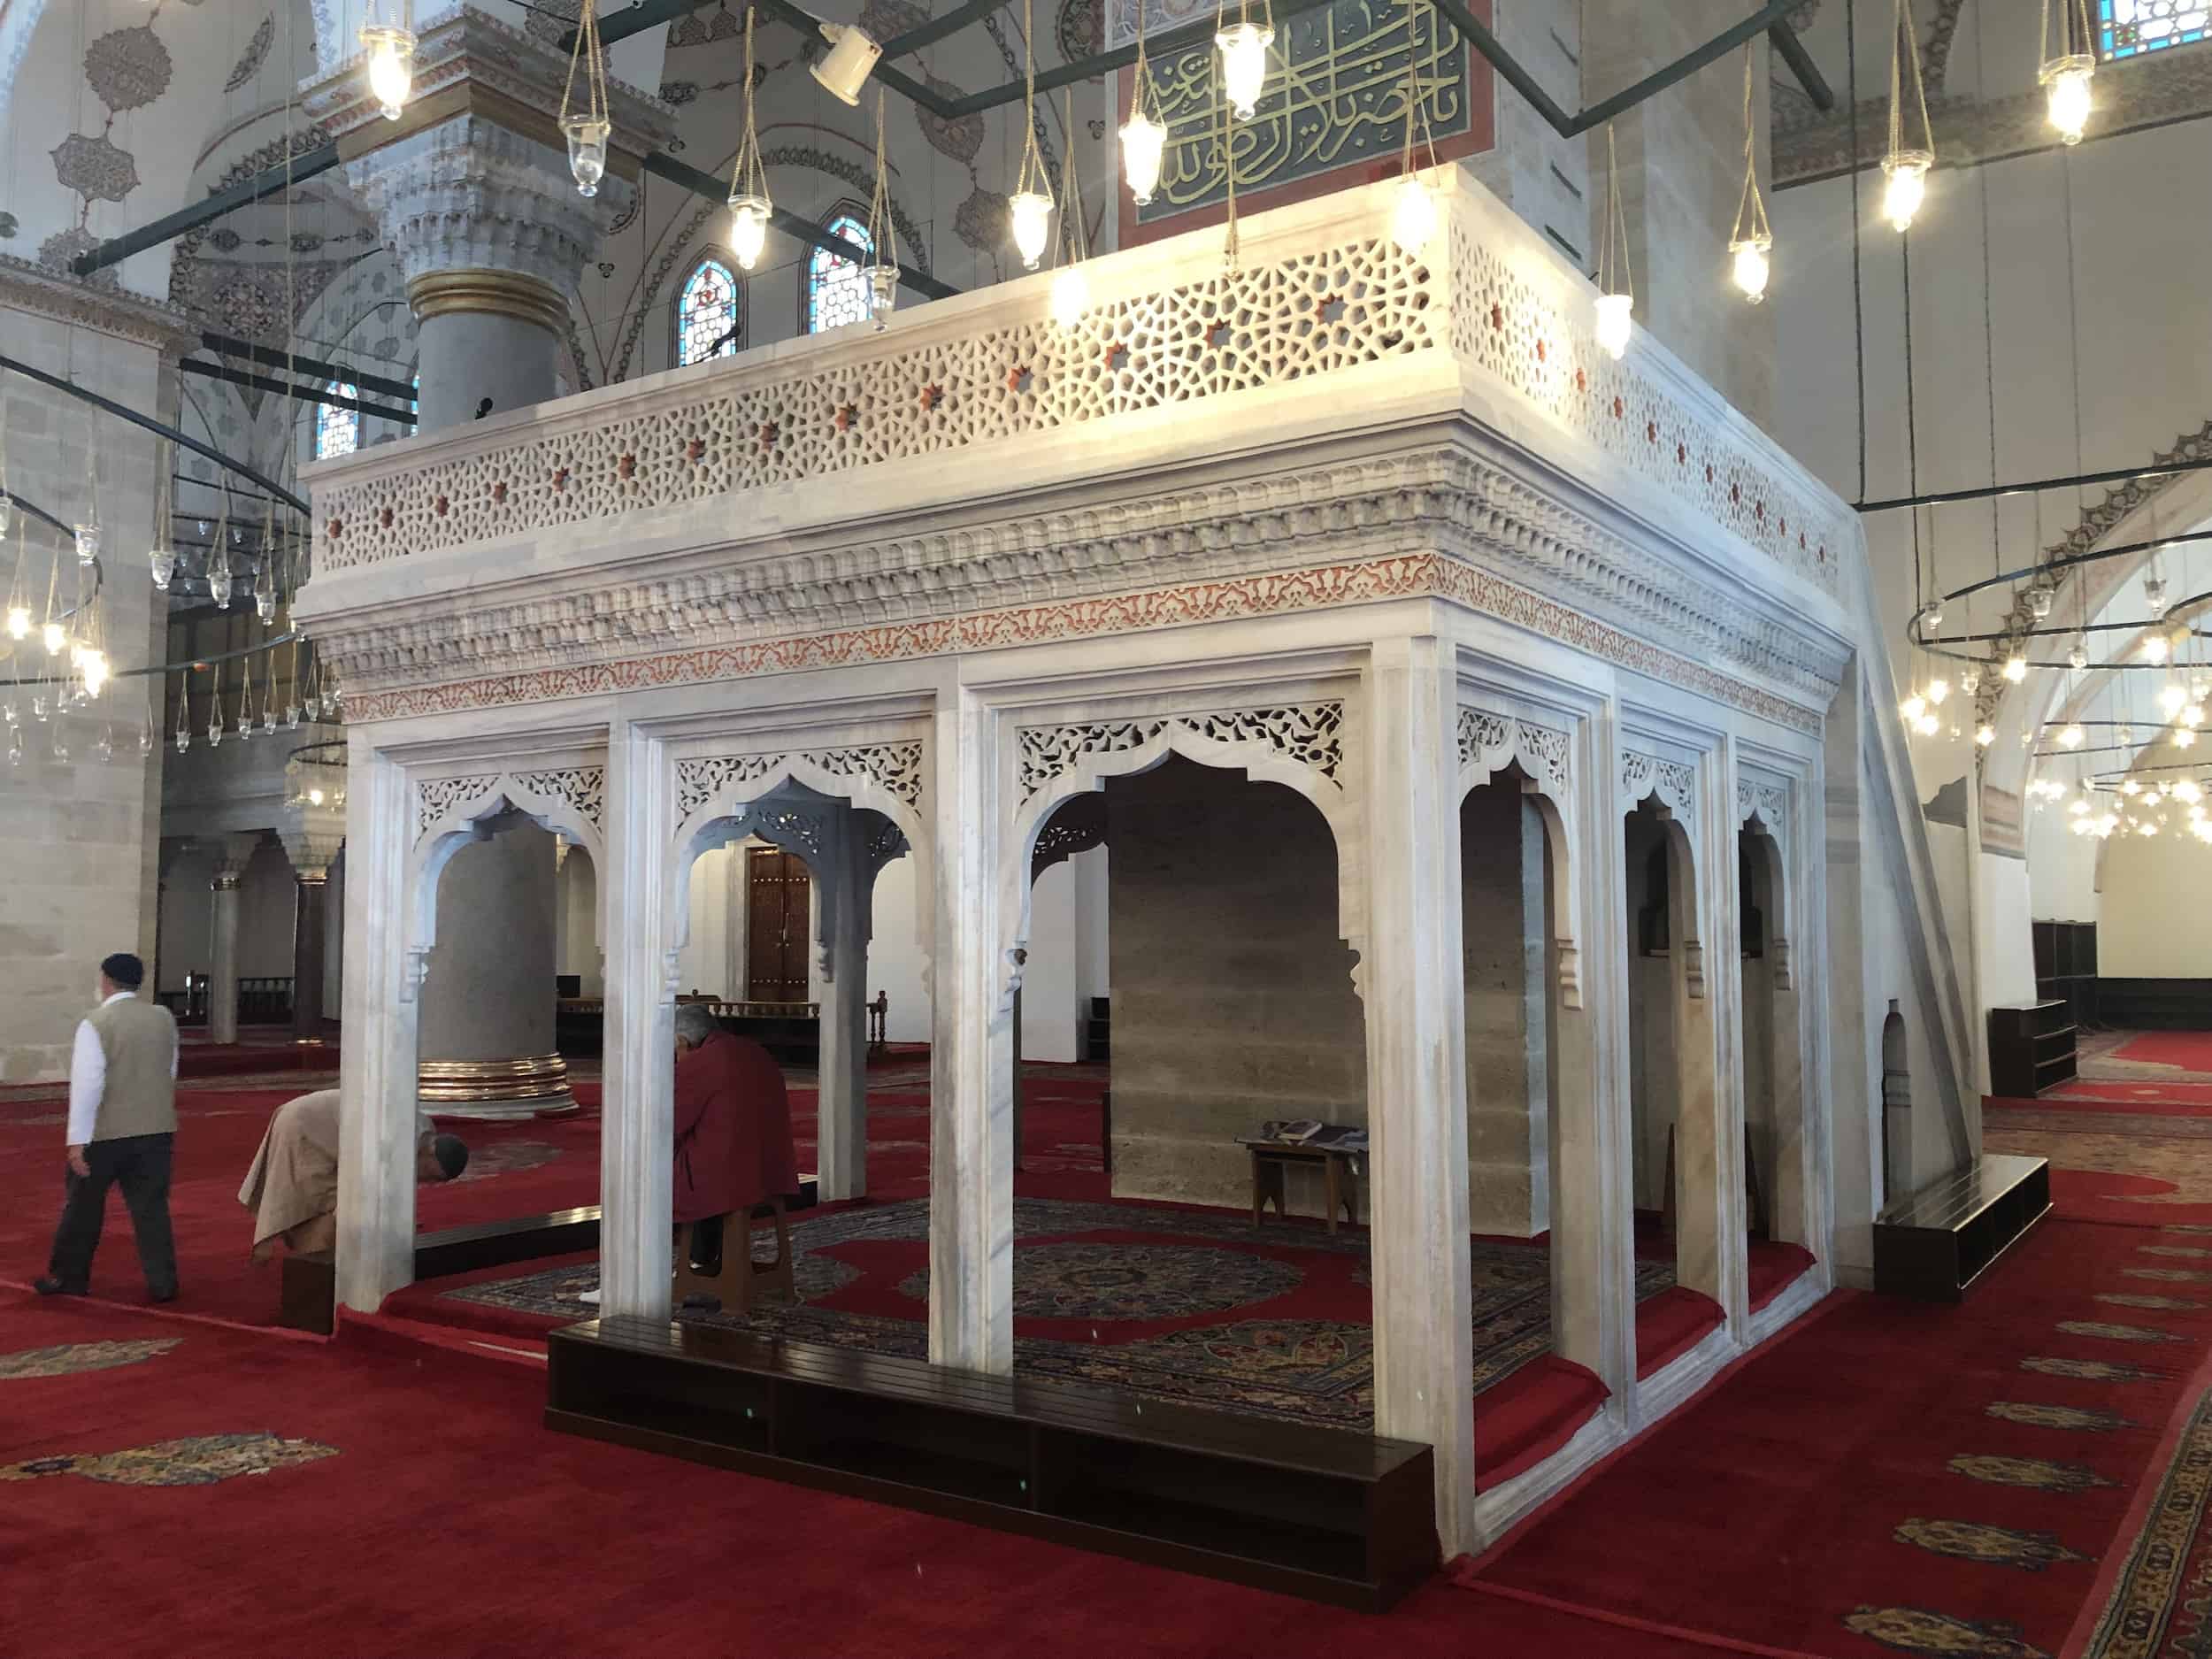 Muezzin's loge of the Bayezid II Mosque in Istanbul, Turkey